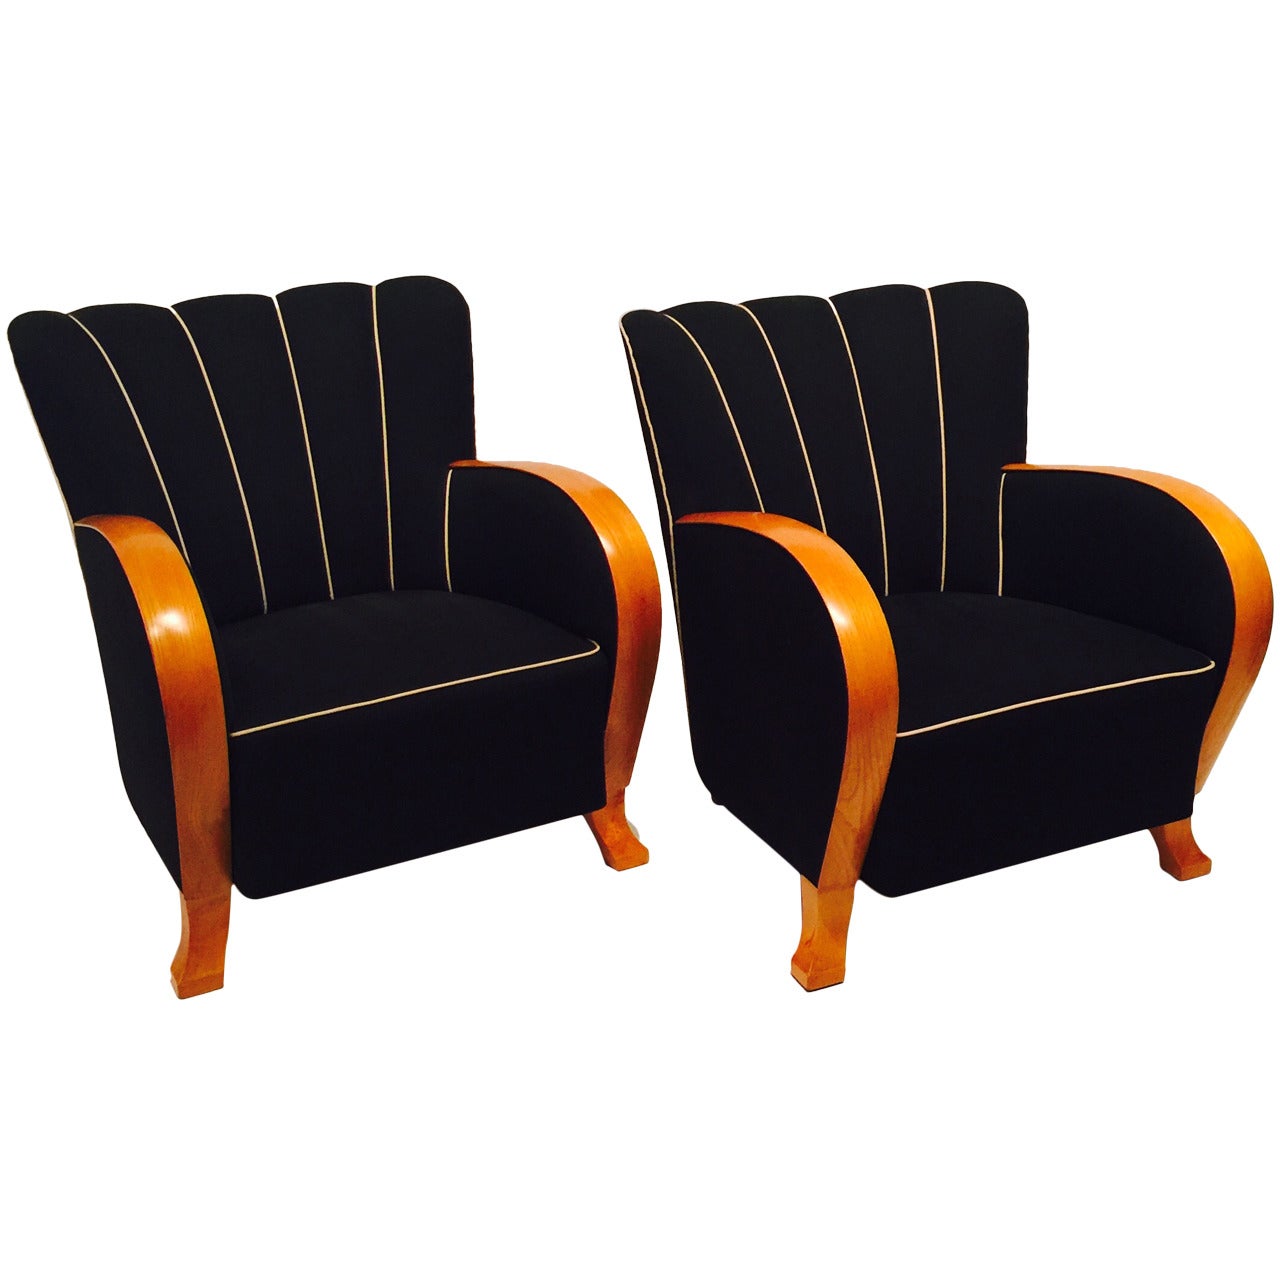 Pair of Art Deco Chairs For Sale